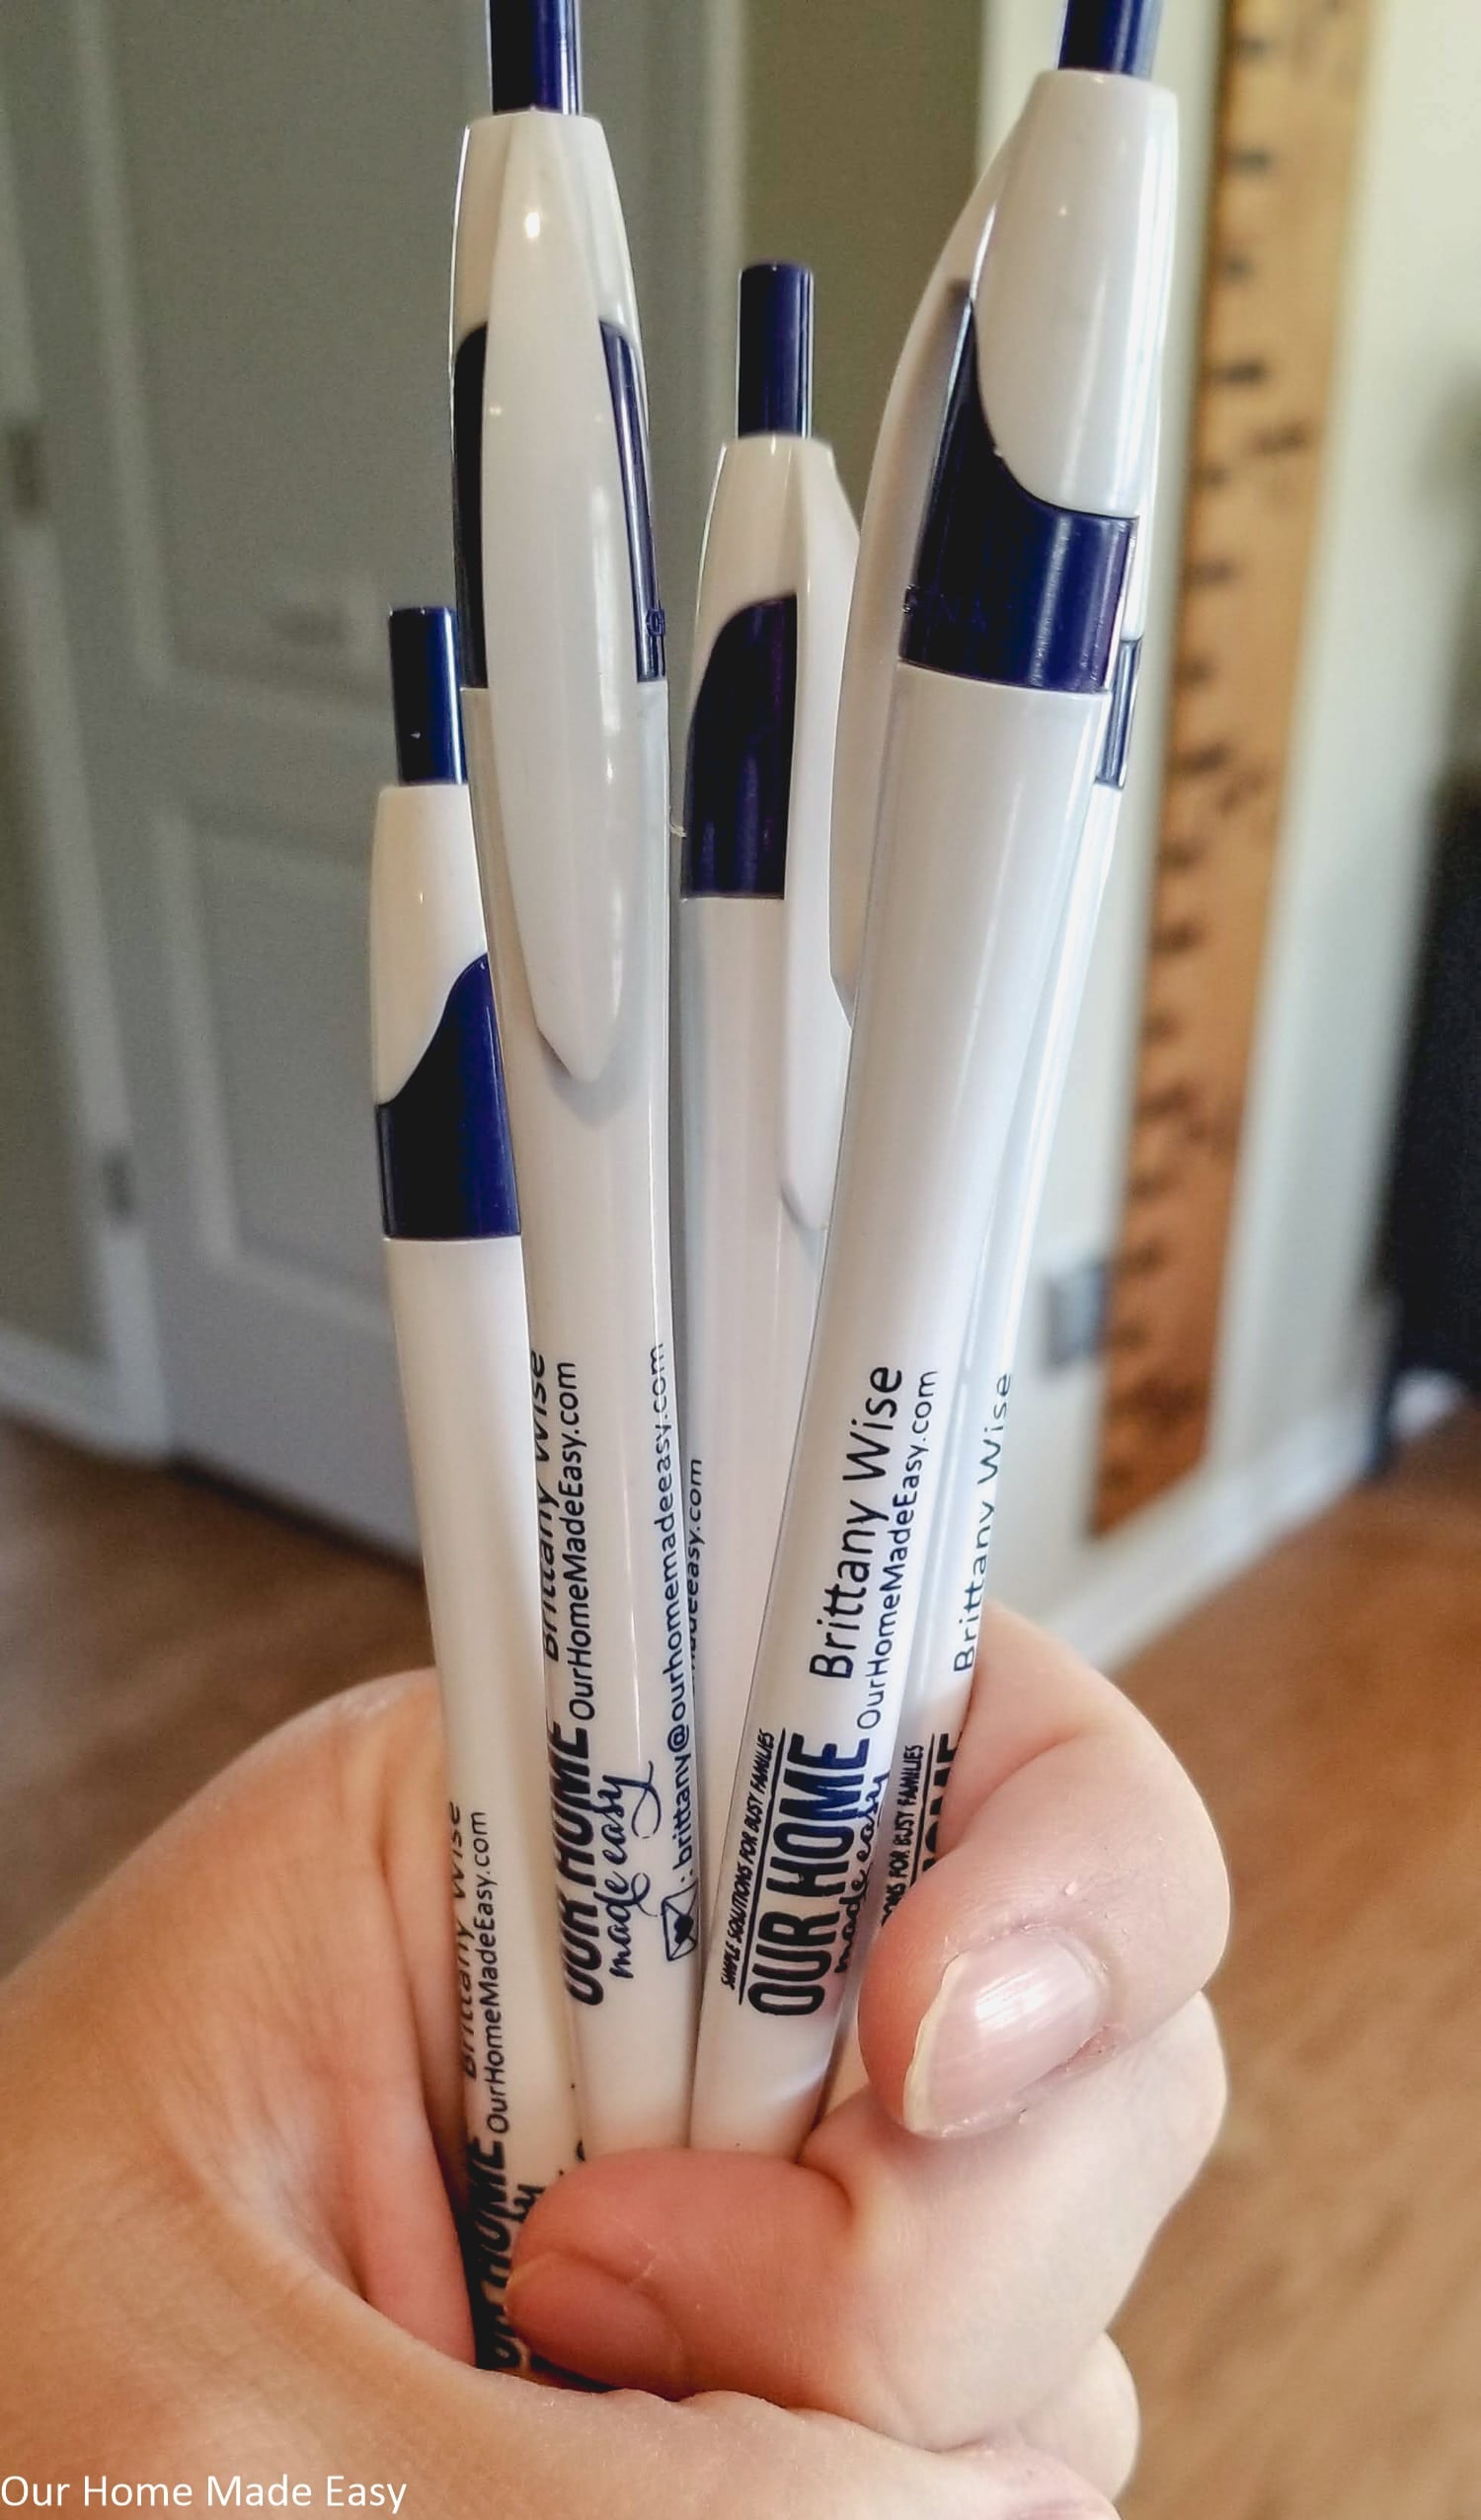 Our Home Made Easy pens